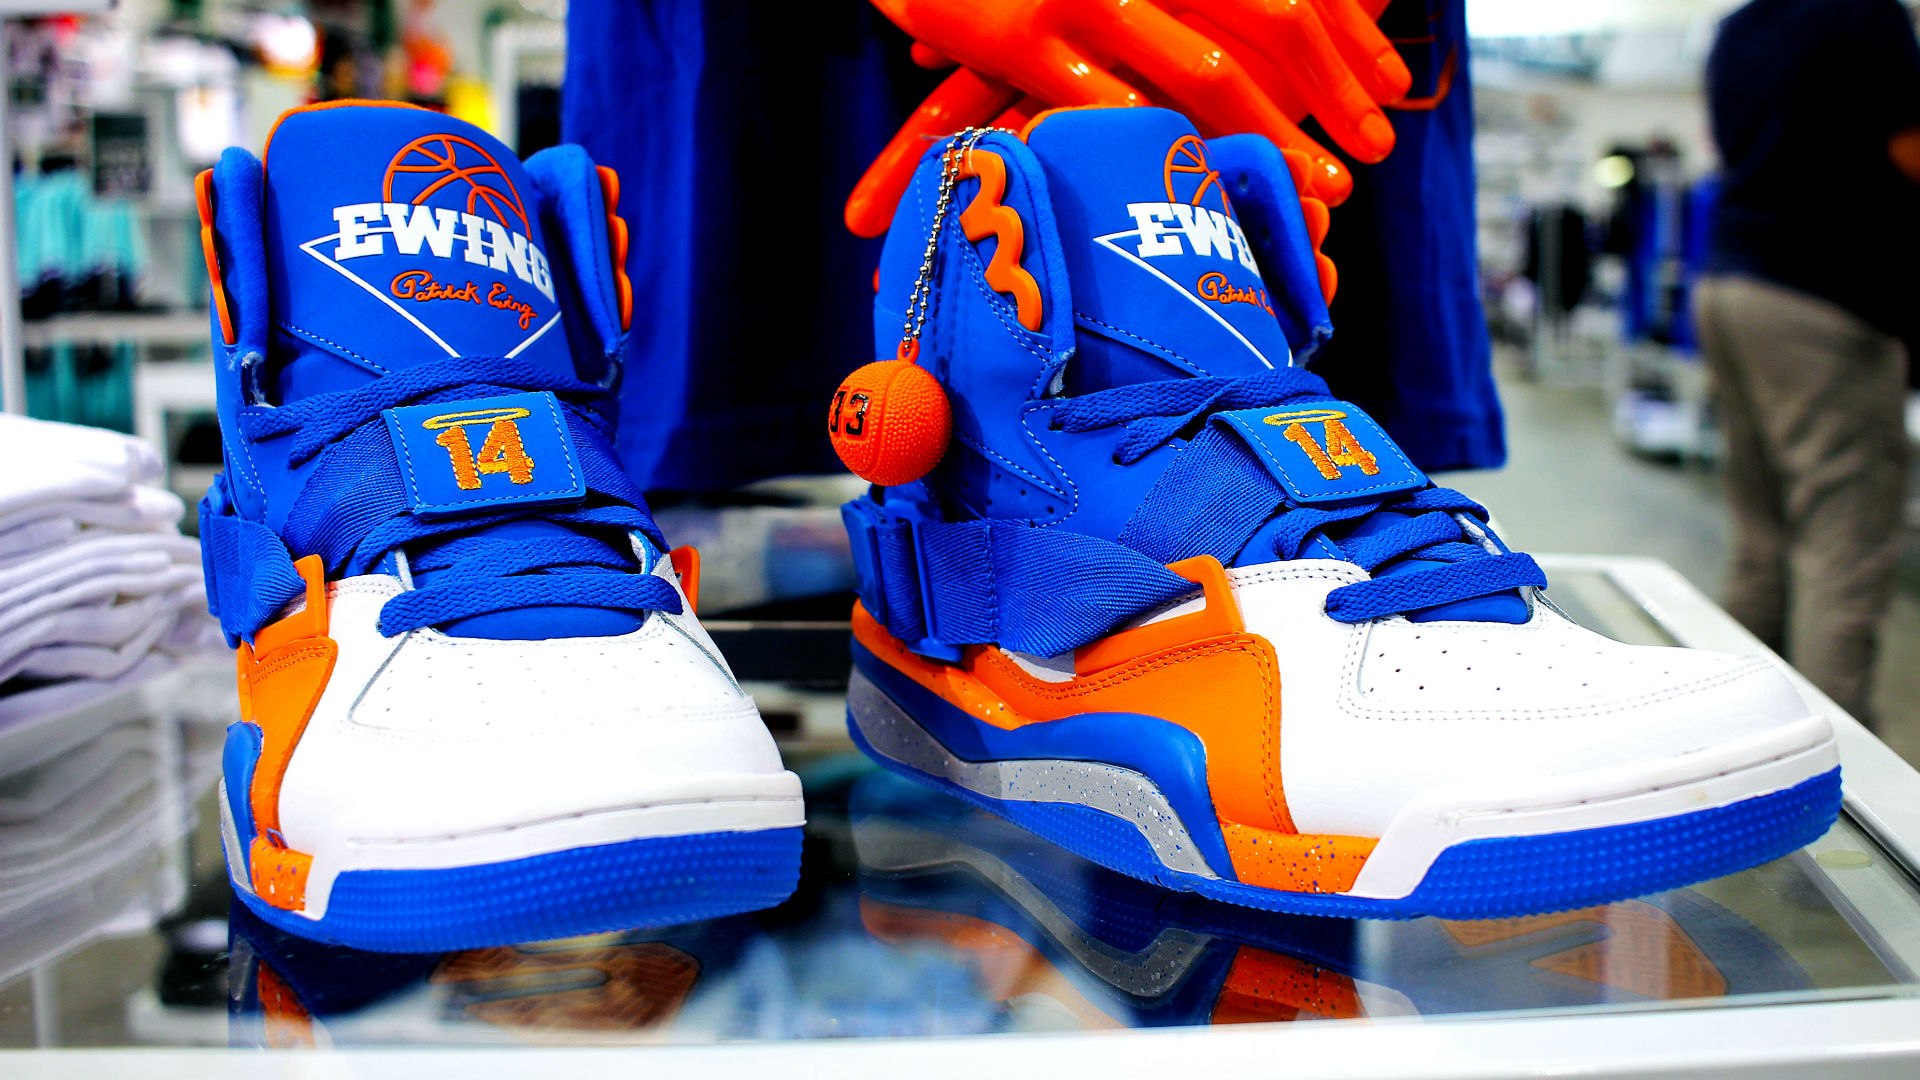 old school patrick ewing shoes